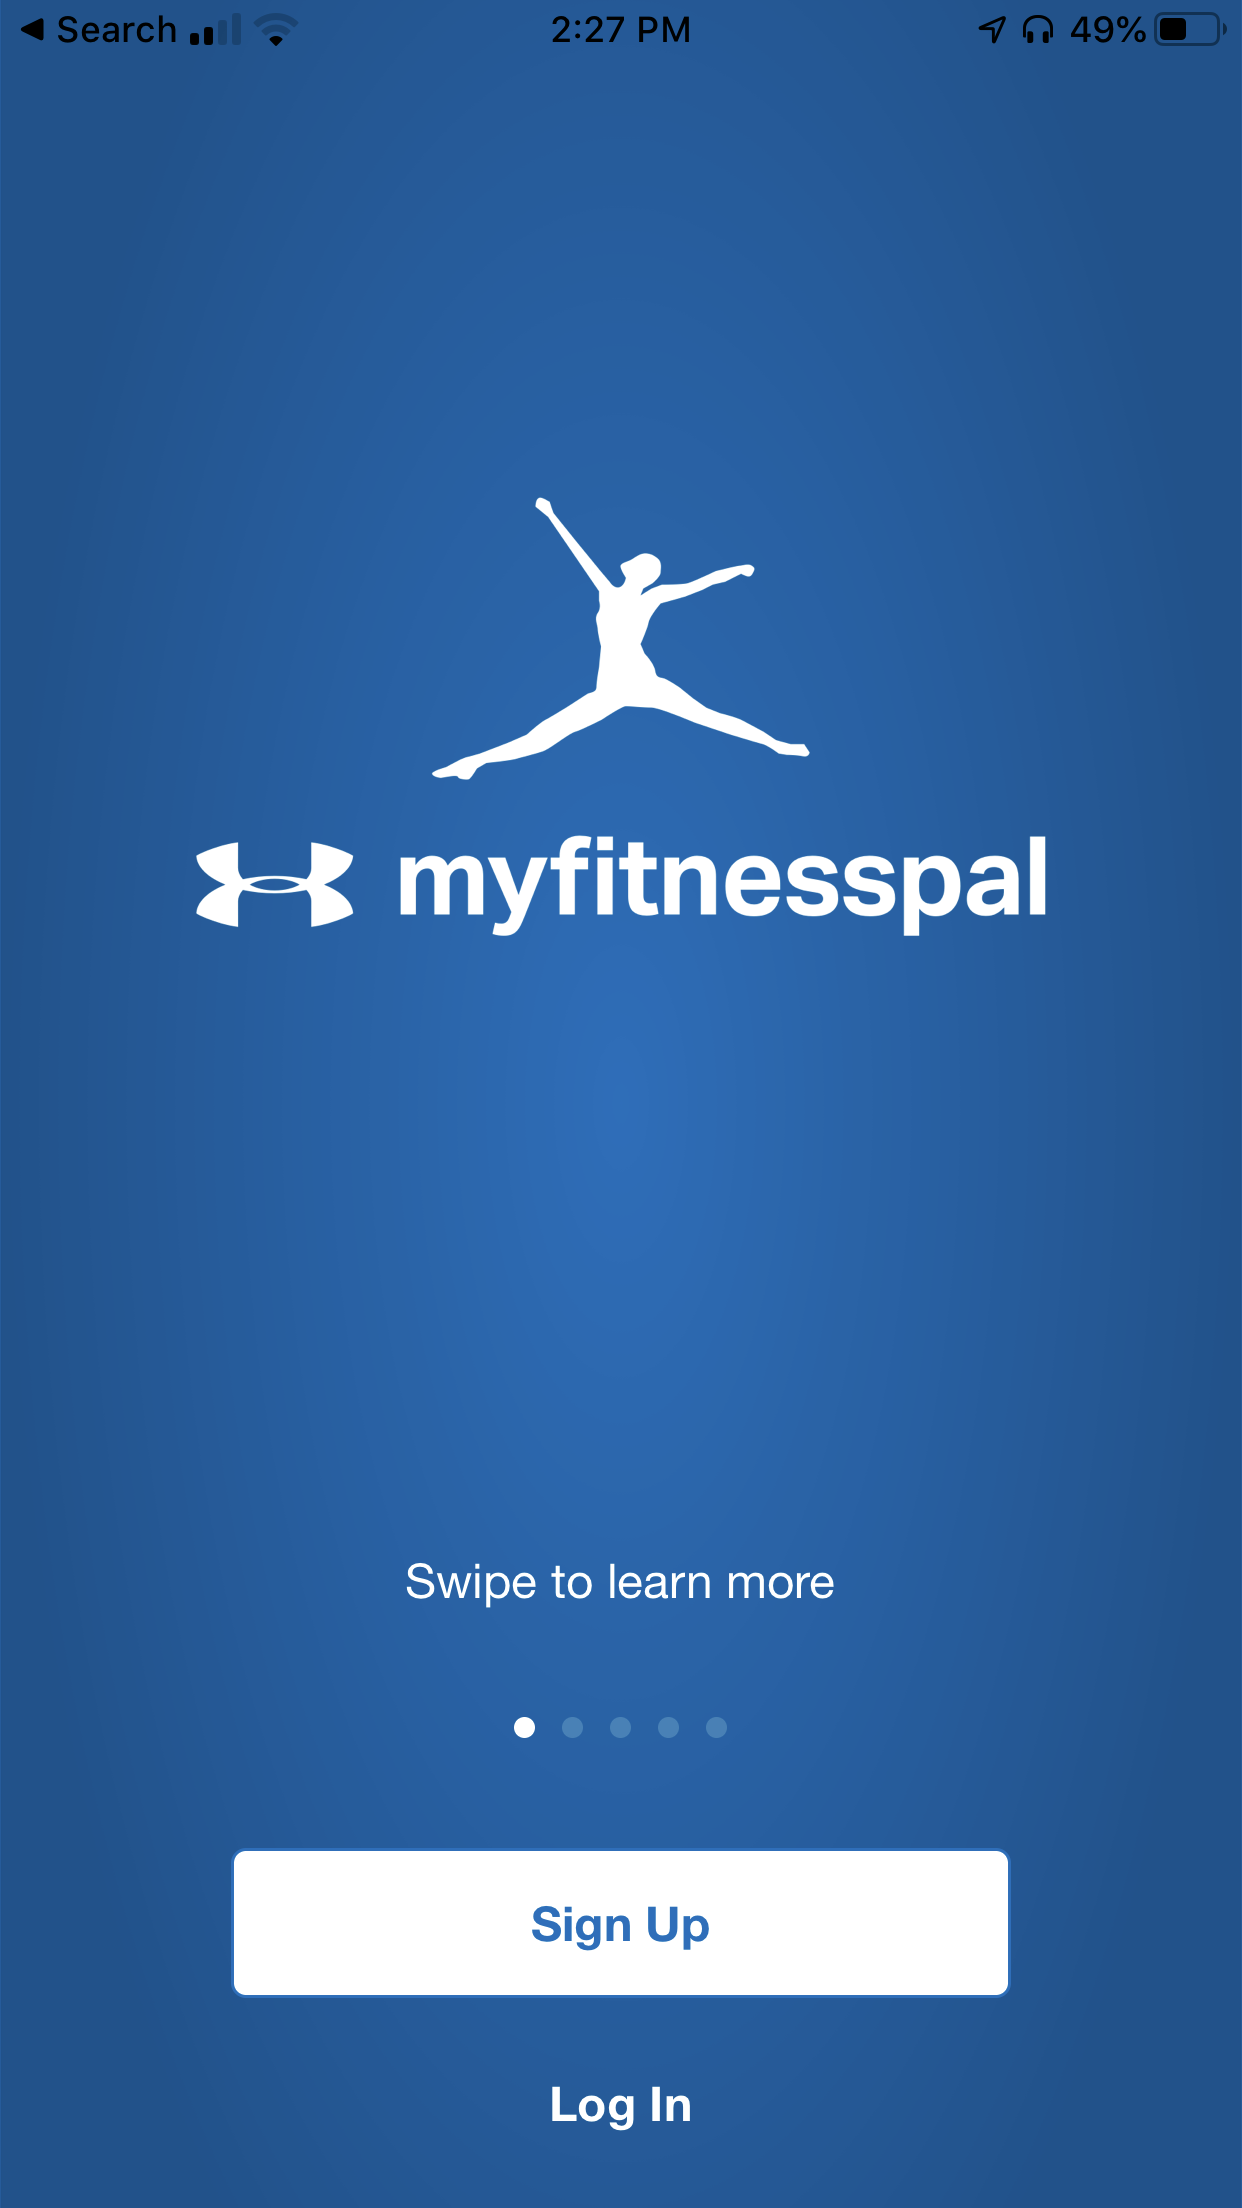 MyFitnessPal: 8 Mistakes You're Making On MyFitnessPal That Are